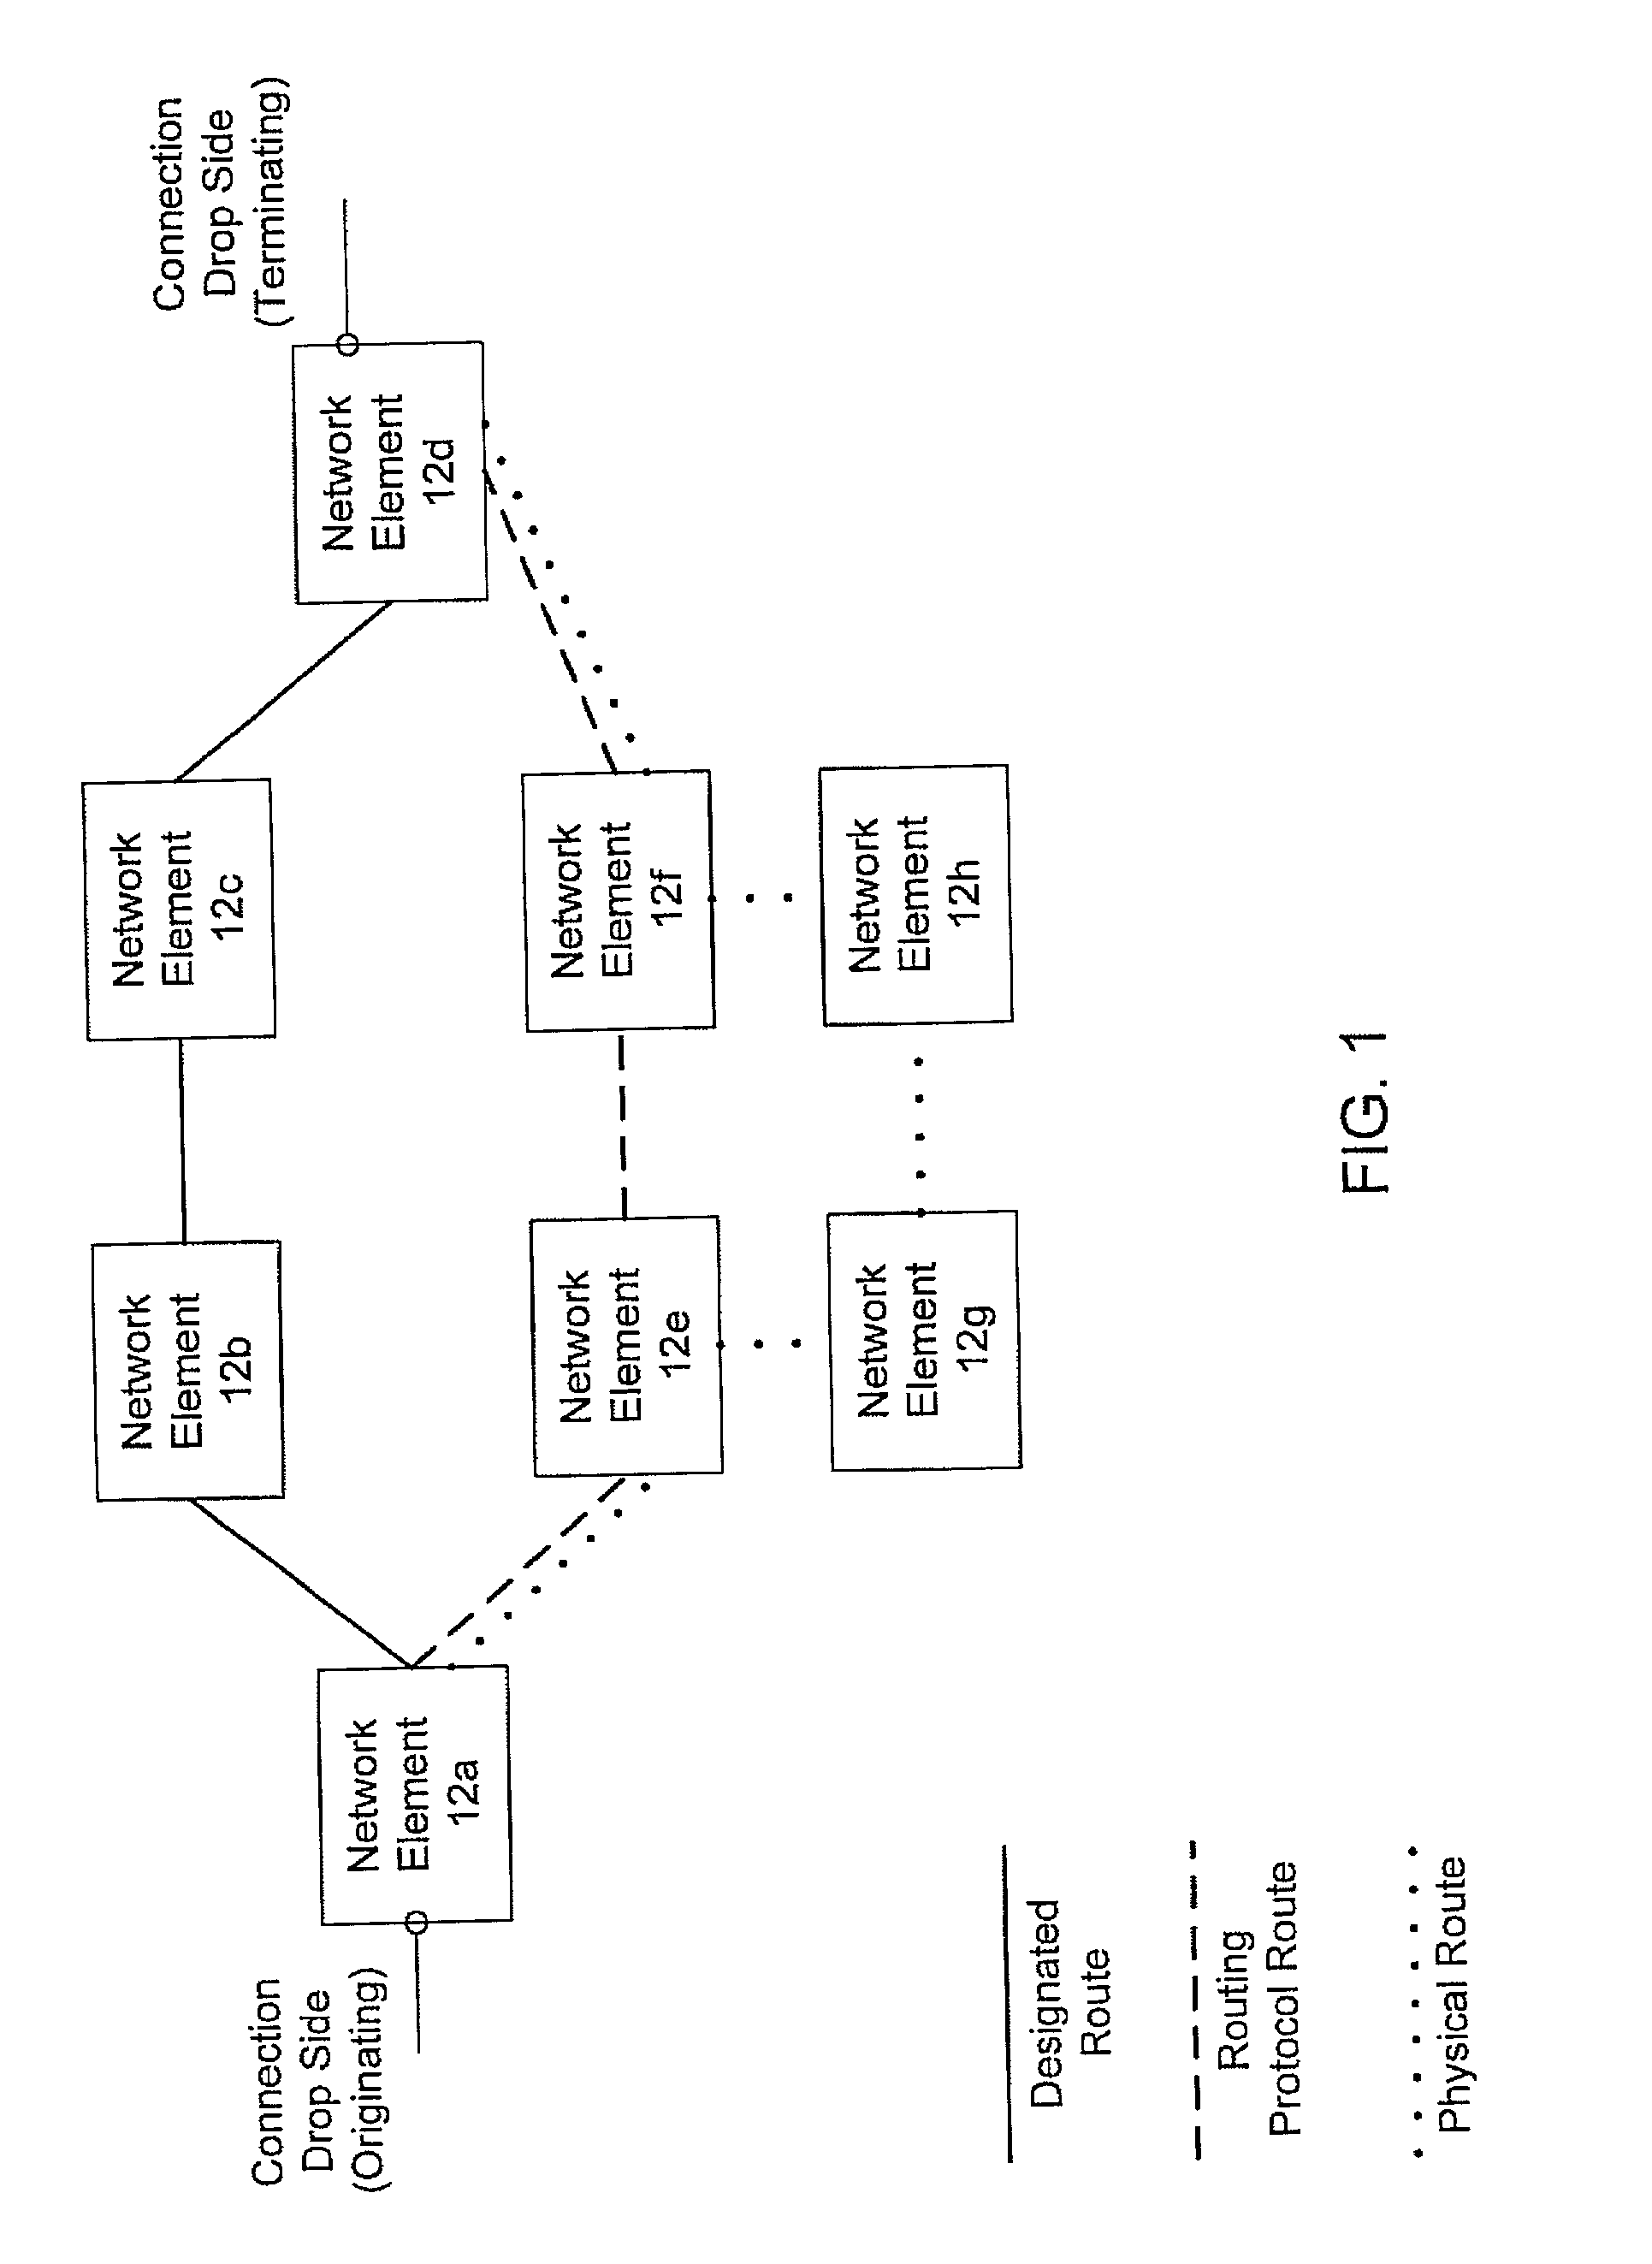 Calculating physical routes in a communication network